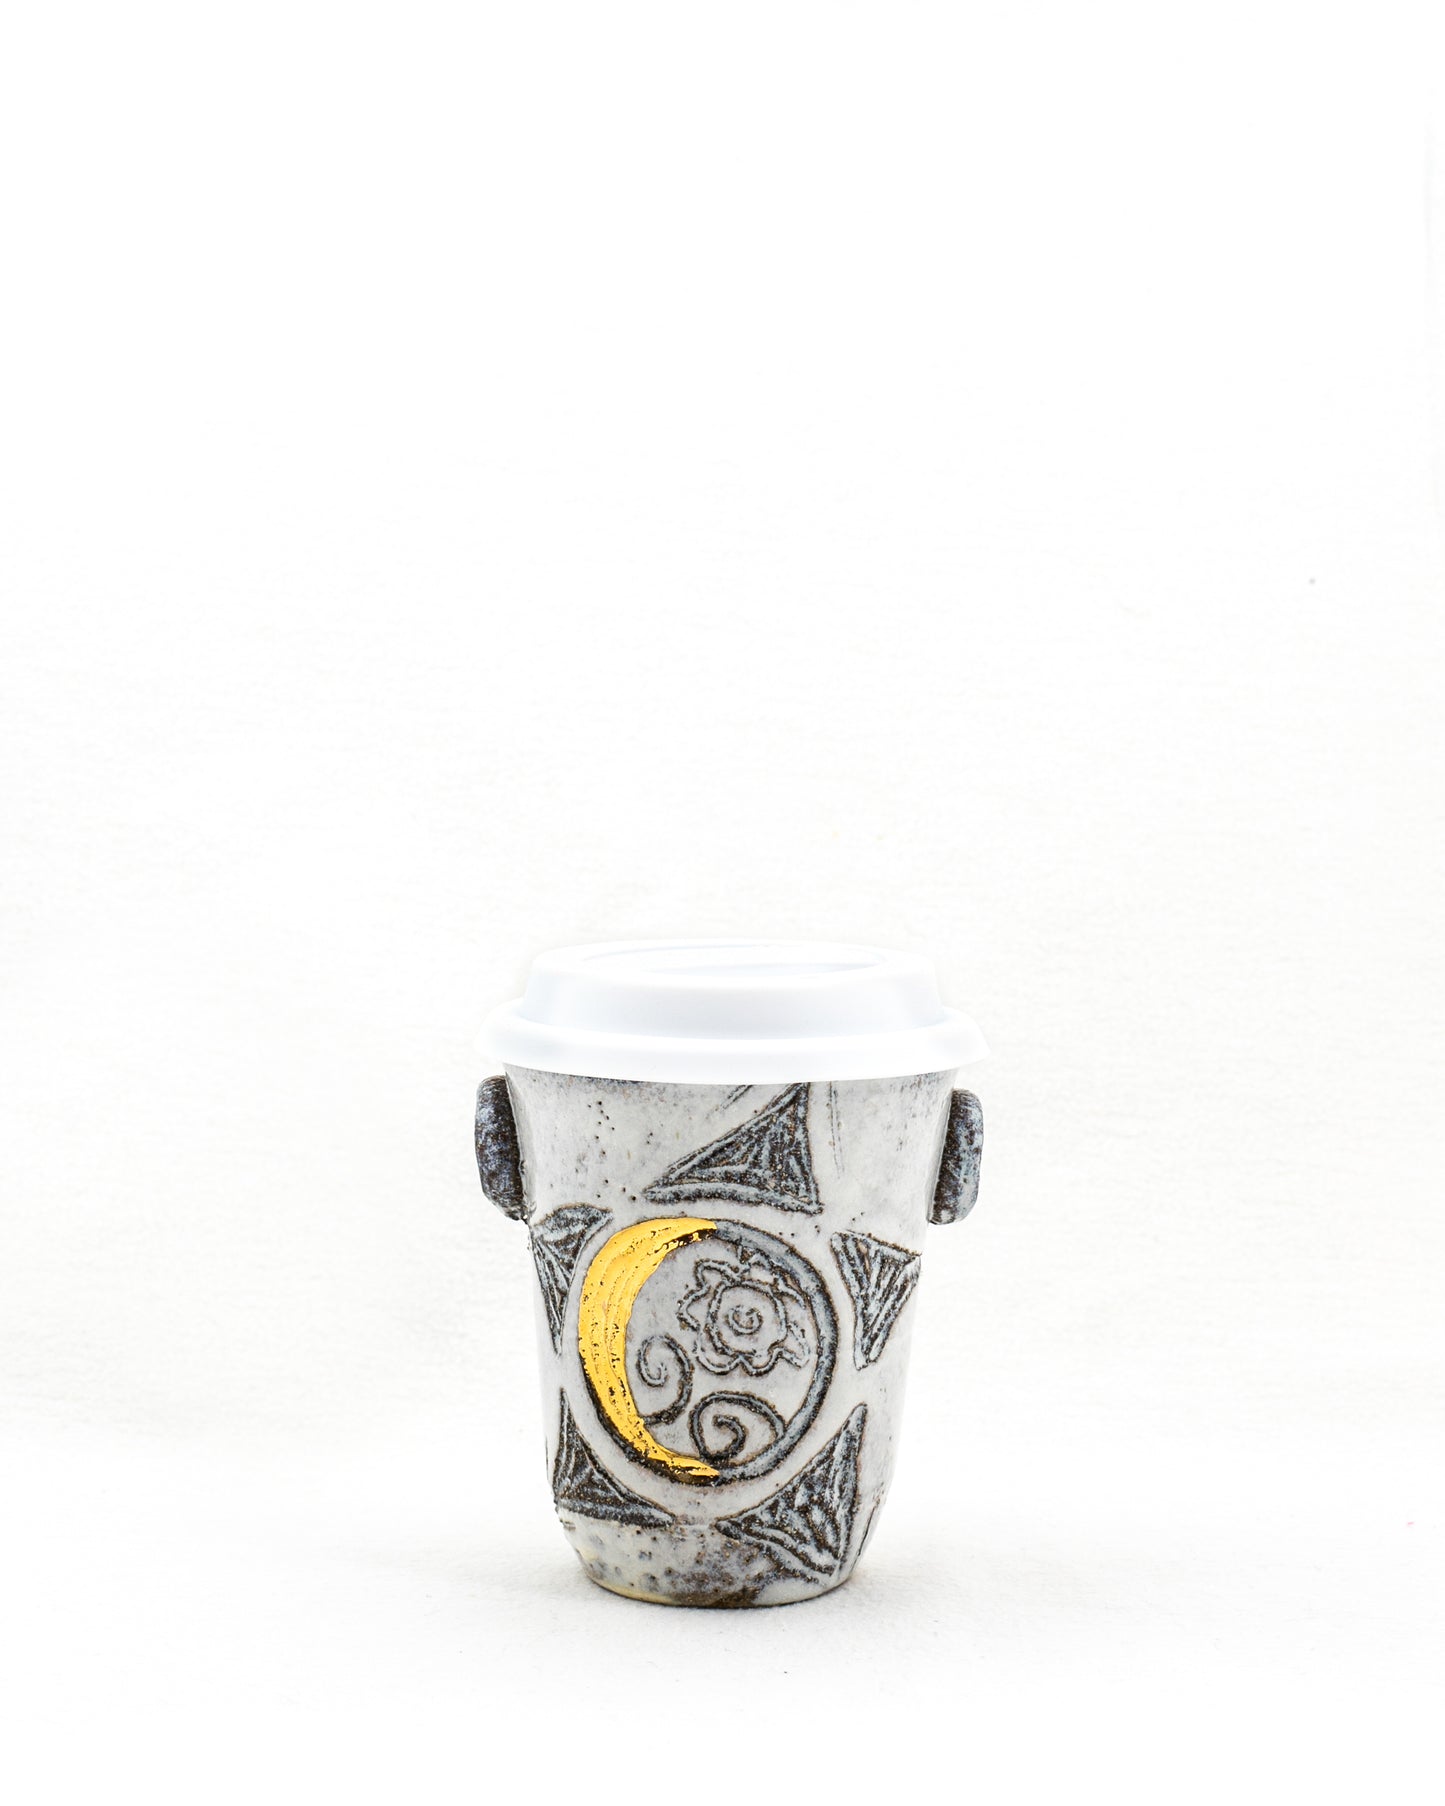 Sacred Full Moon - Crescent Moon Ceramic Holding Cup